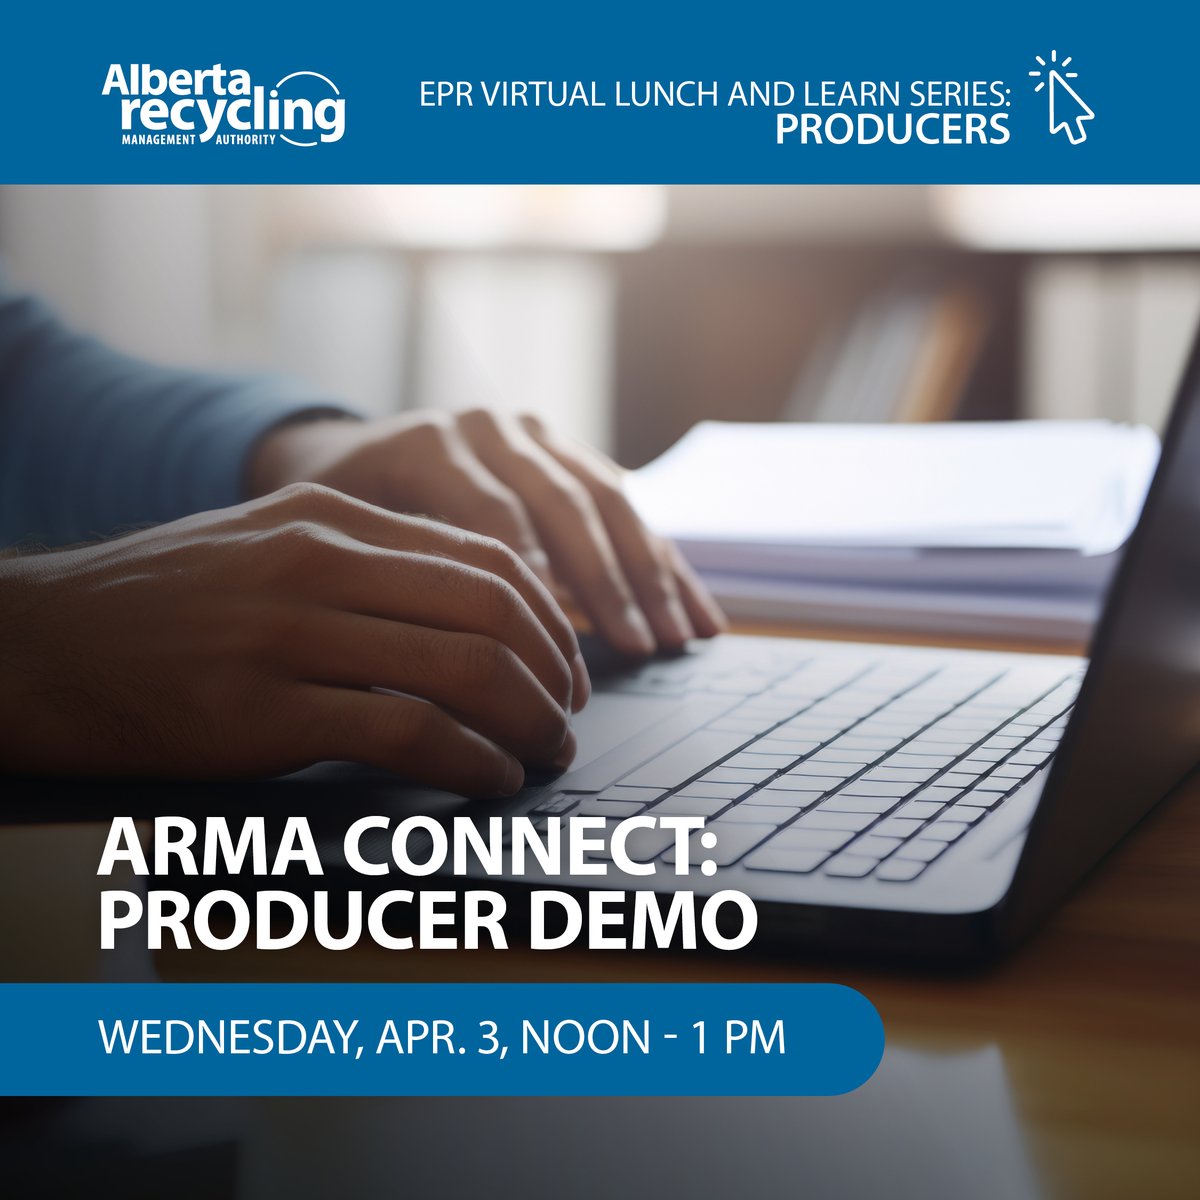 Producers, join us for our ARMA Connect: Producer Demo on April 3. This new webinar aims to demystify the supply reporting process and empower stakeholders with the knowledge and tools for seamless report submission. Register now at: bit.ly/3IScANL #EPRAlberta #Producers